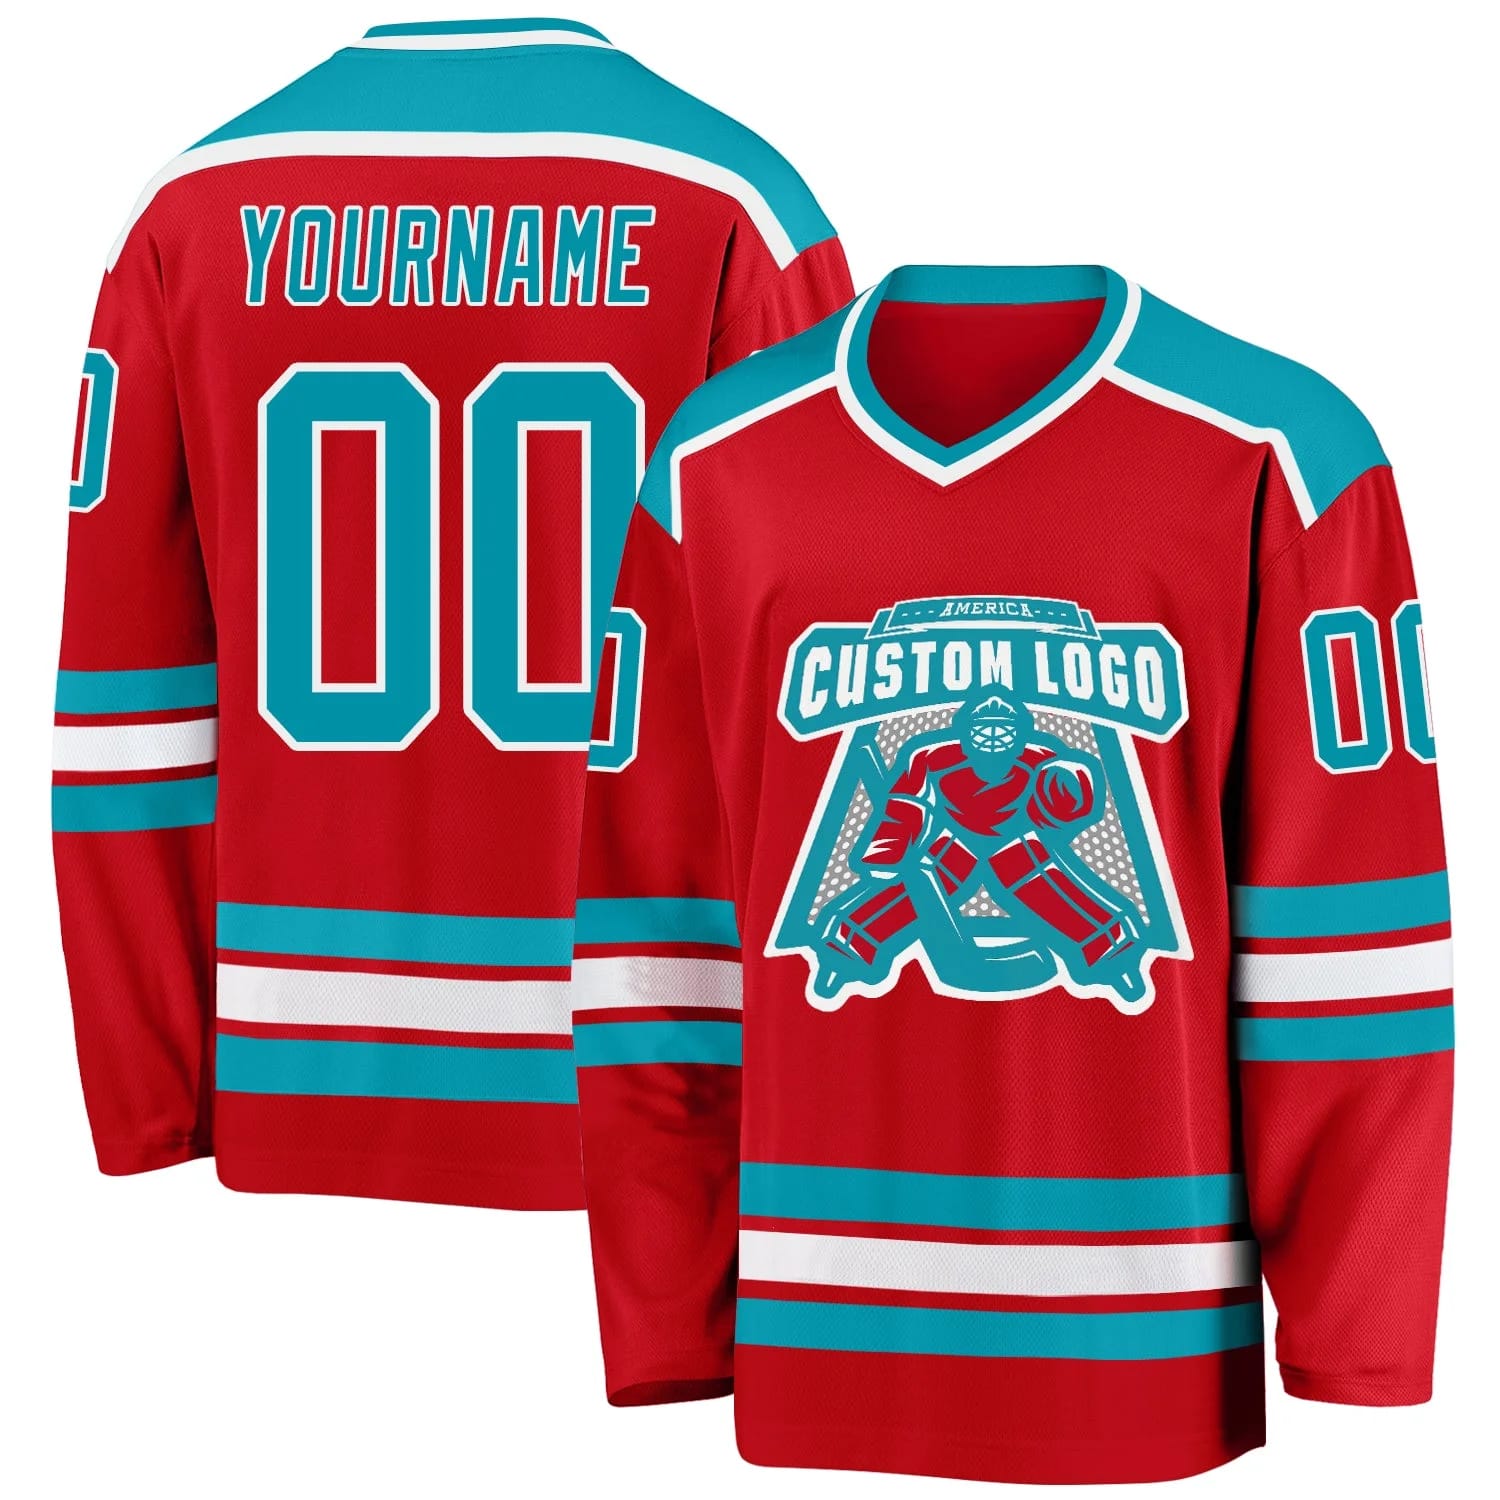 Stitched And Print Red Teal-white Hockey Jersey Custom